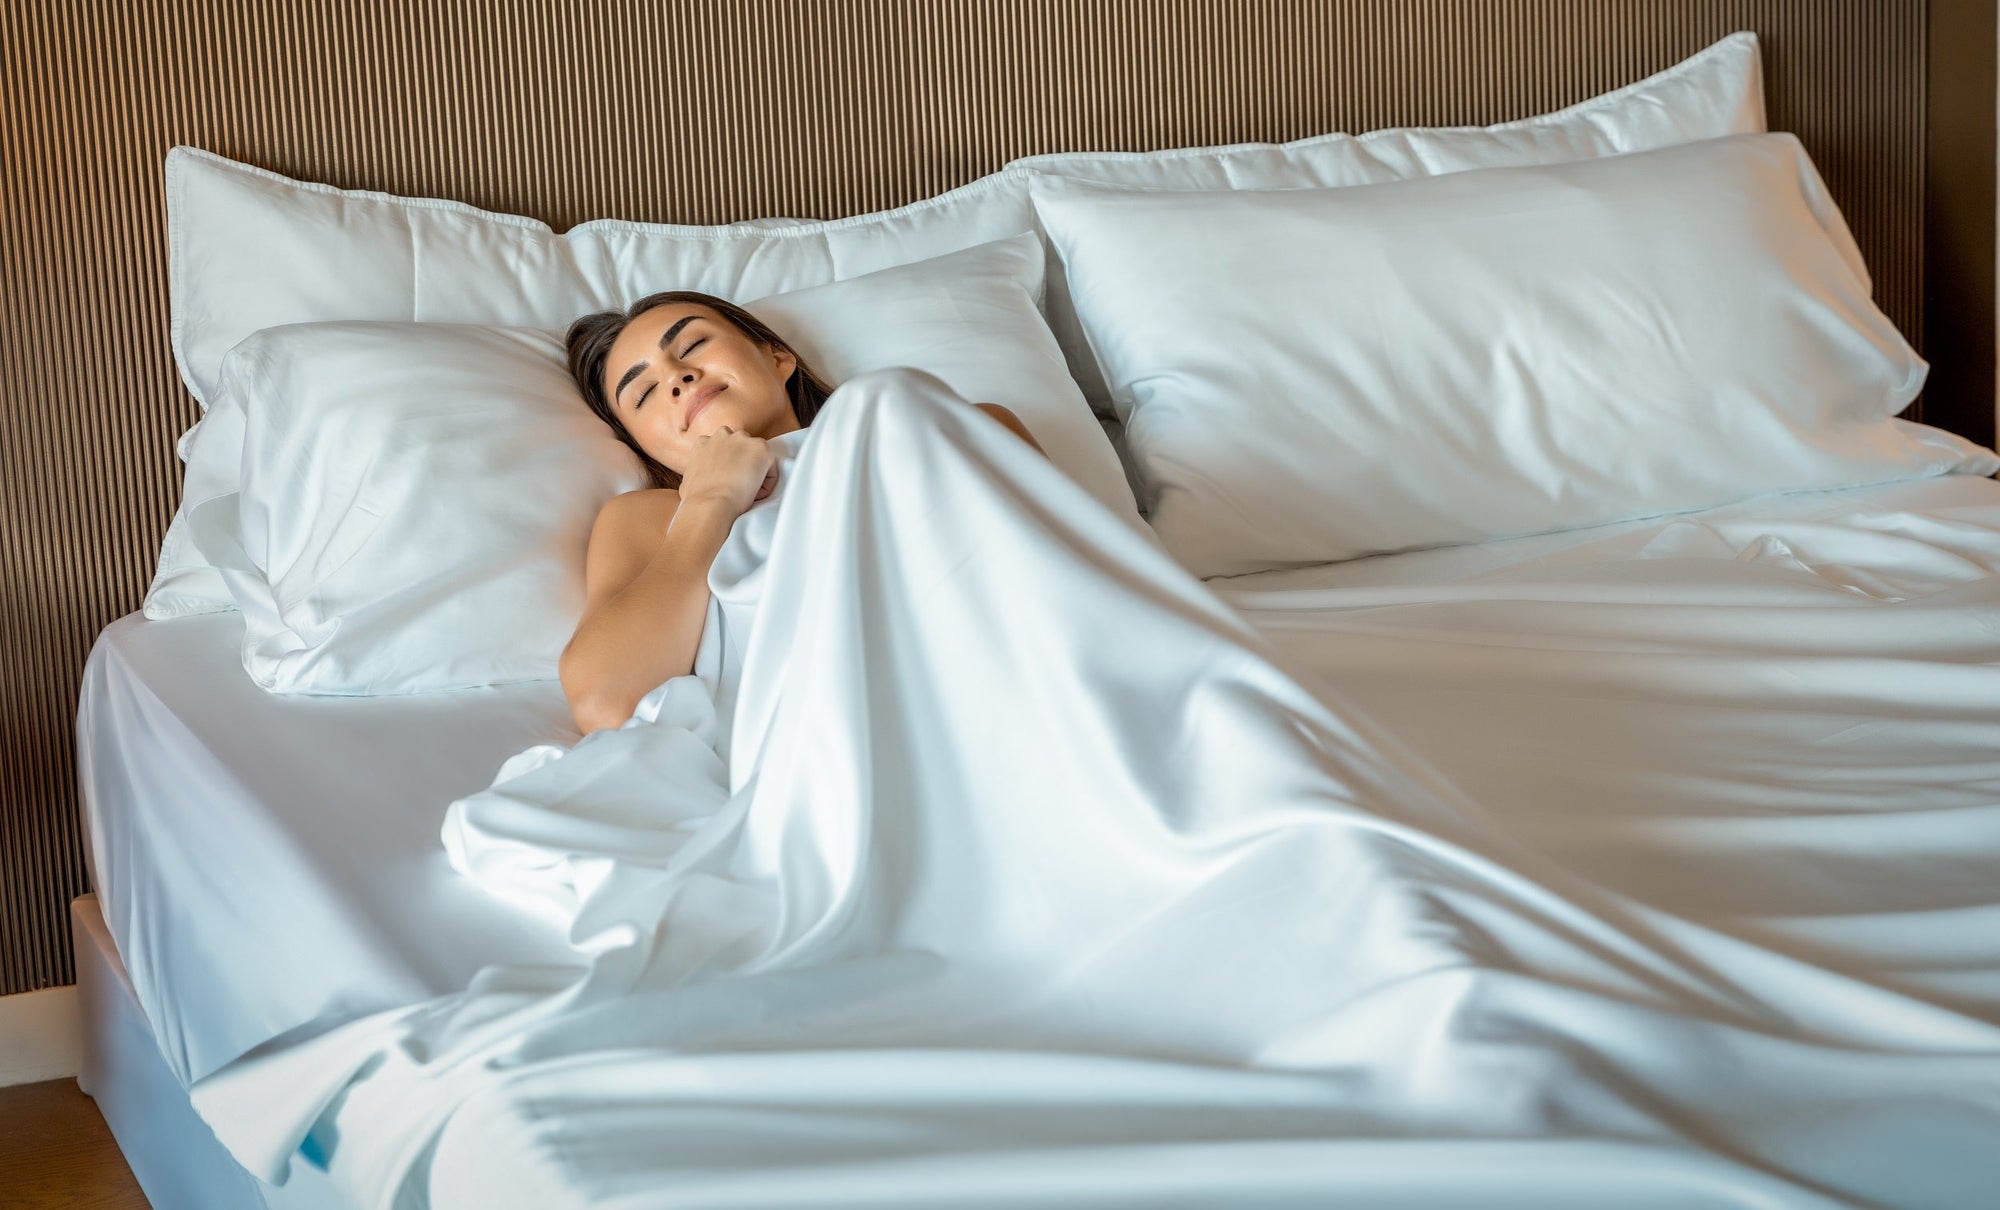 A woman is just waking up and enjoying the comfort of her sustainable eucalyptus sheets.